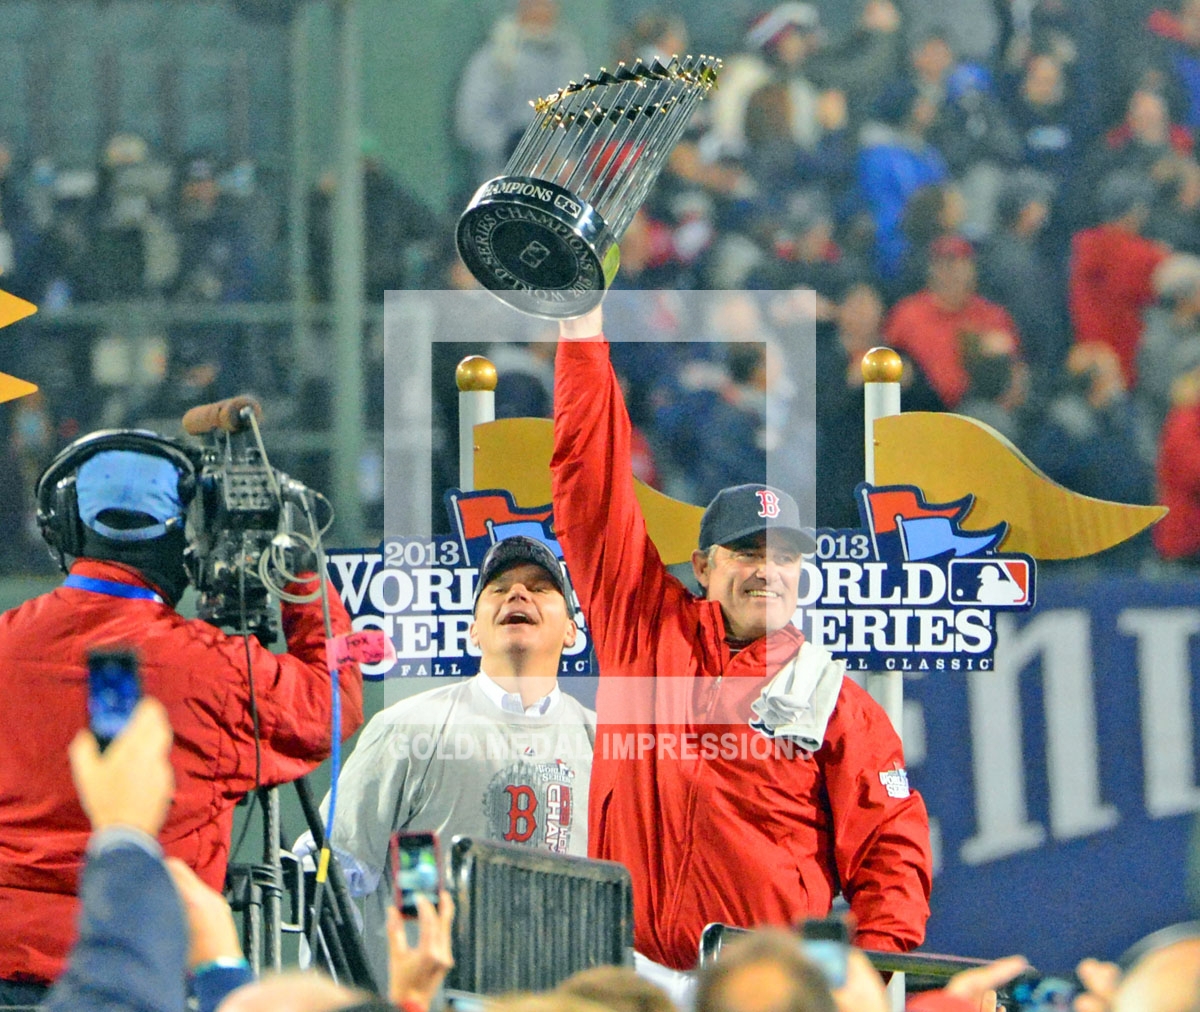 Boston Red Sox manager, John Farrell, holds up the World Series Trophy after winning game 6 by a score of 6-1. The is the first time the Red Sox have won a world series at Fenway Park since 2018